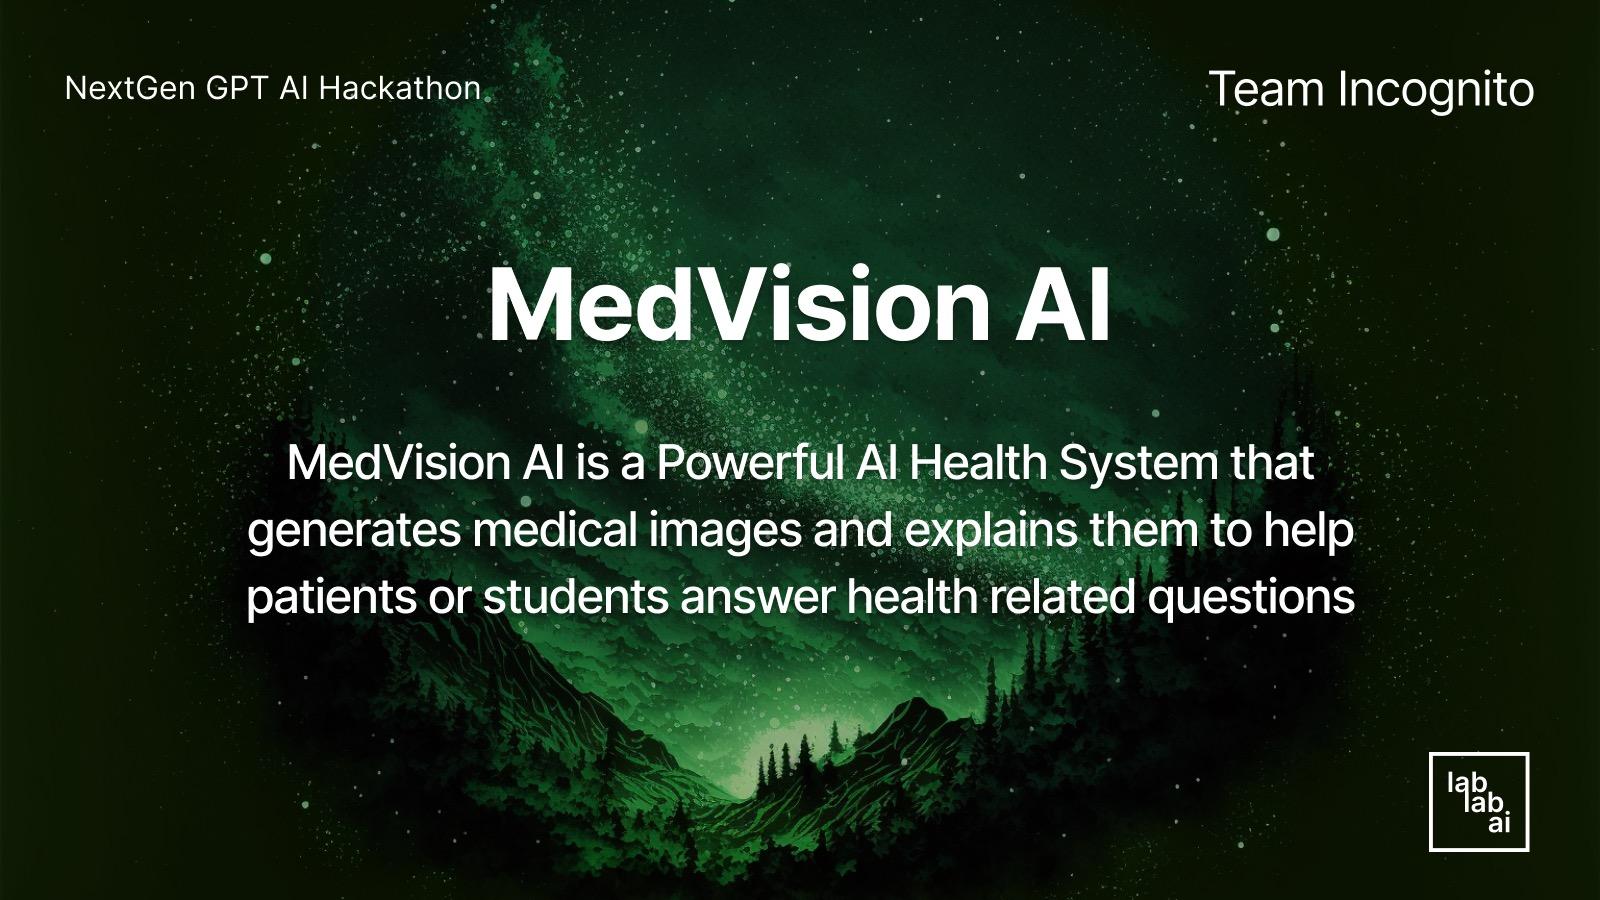 MedVision AI